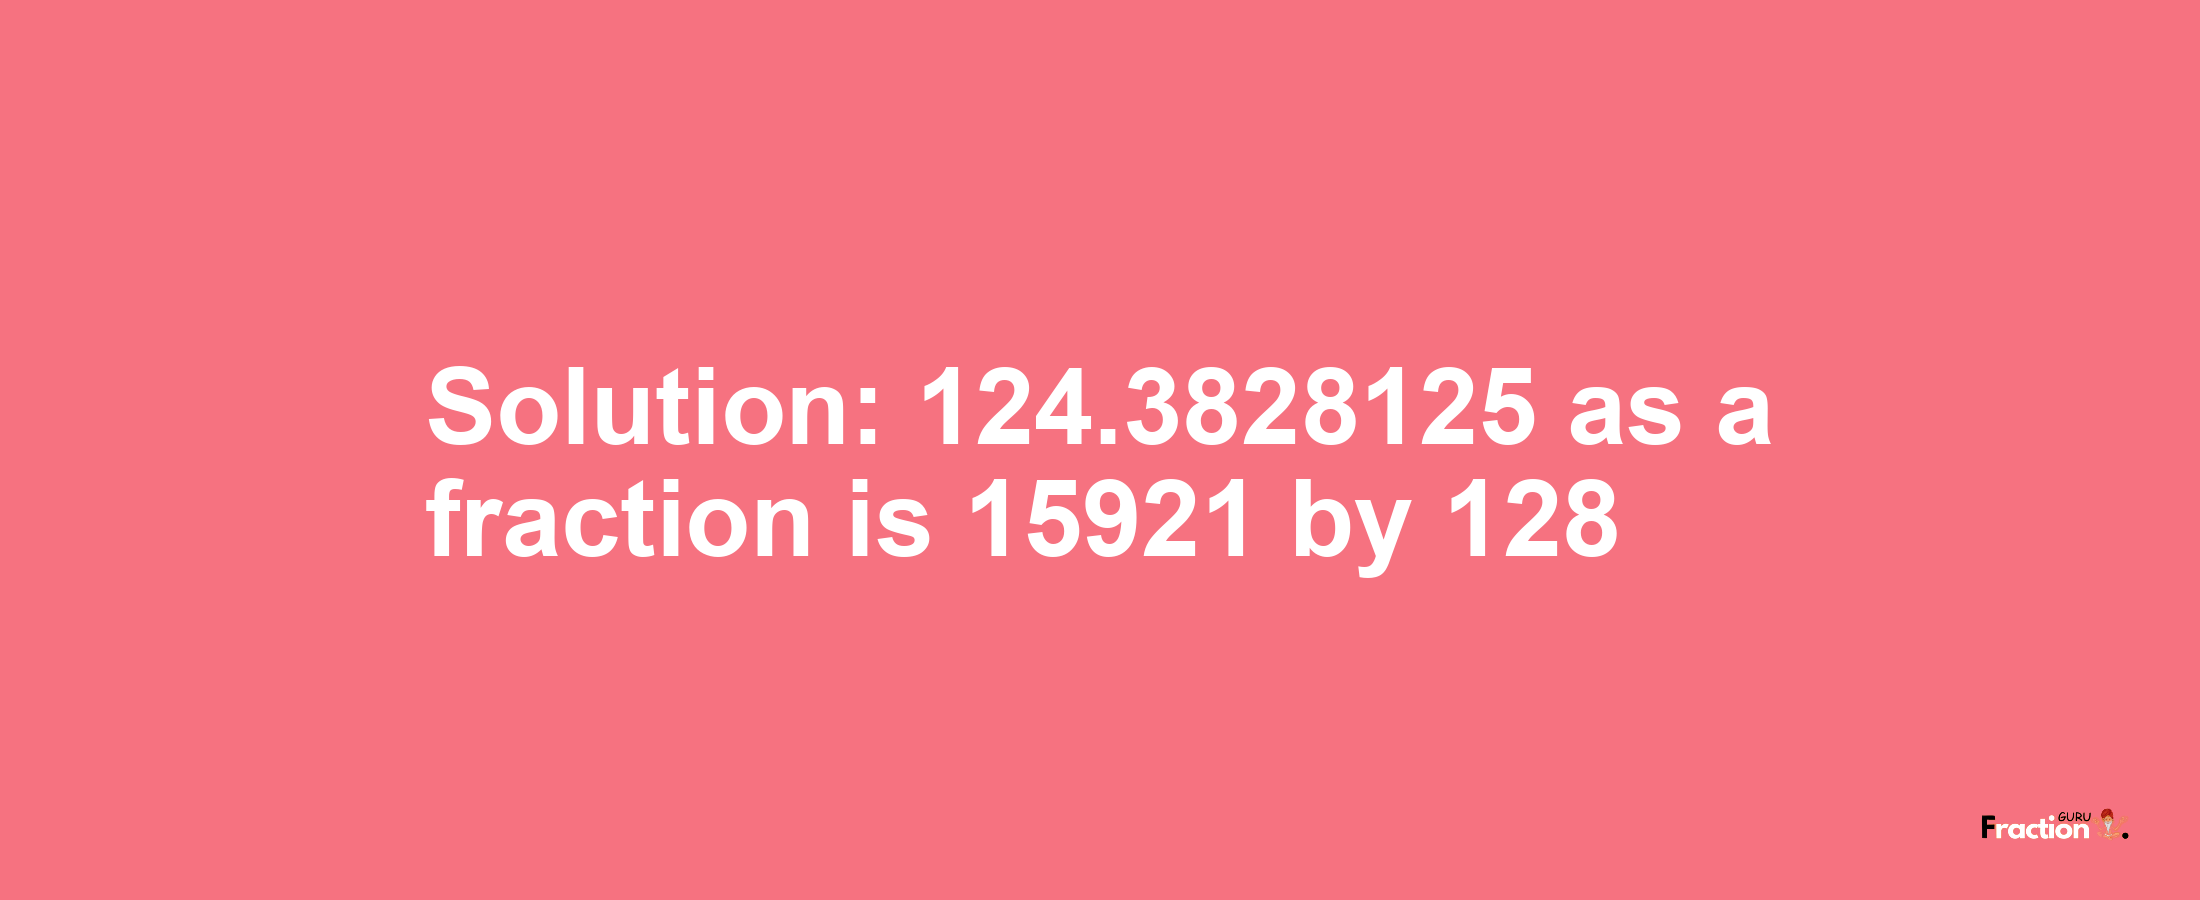 Solution:124.3828125 as a fraction is 15921/128